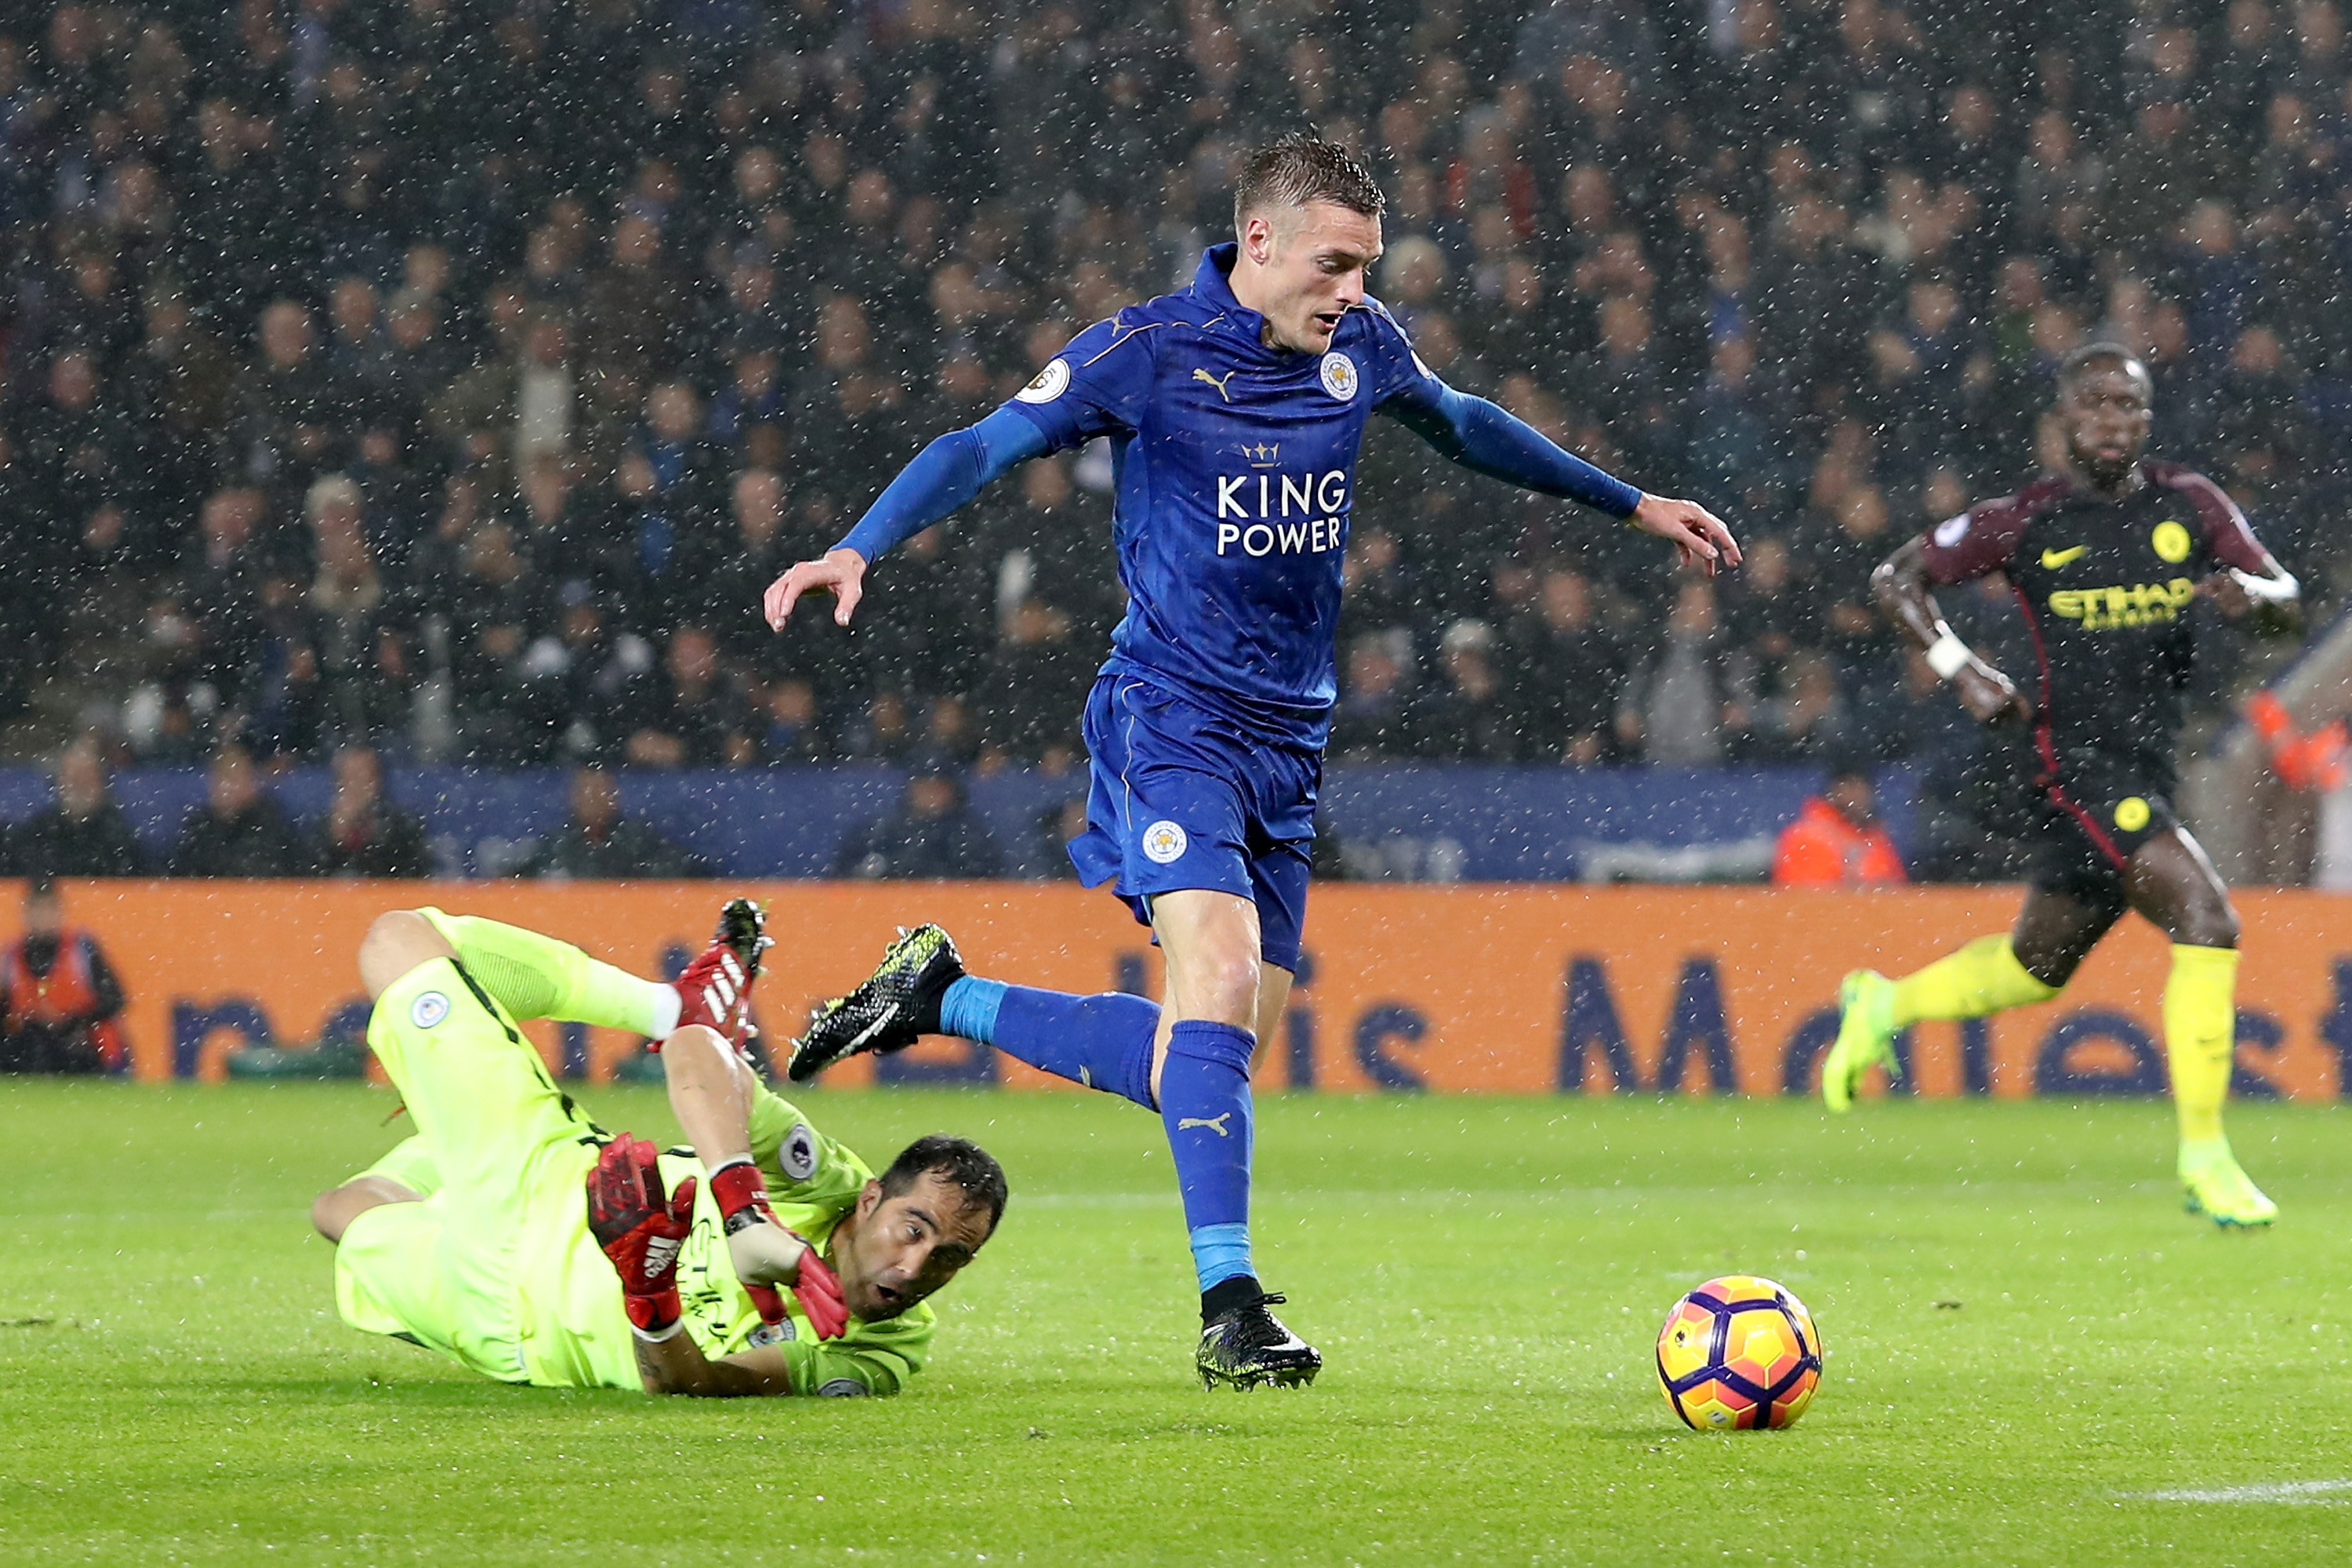 LEICESTER, ENGLAND - DECEMBER 10:  Jamie Vardy of Leicester City (R) scores his sides third goal past Claudio Bravo of Manchester City (L) during the Premier League match between Leicester City and Manchester City at the King Power Stadium on December 10, 2016 in Leicester, England.  (Photo by Christopher Lee/Getty Images)